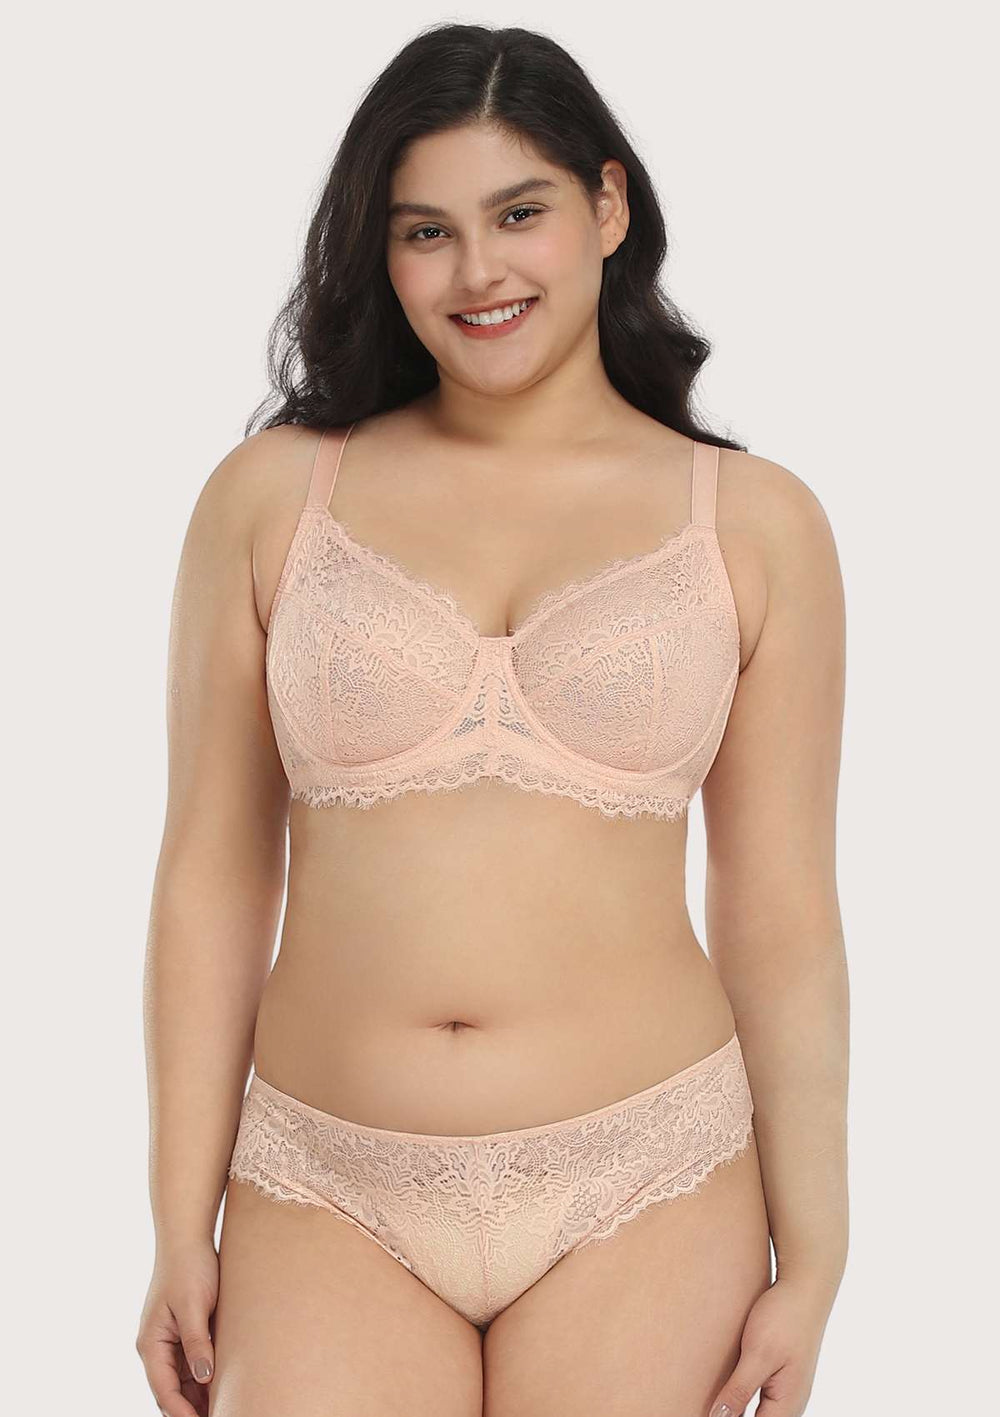 CUUP Sale: Save 60% On Bras That Come in 53 Sizes Plus Panties & More